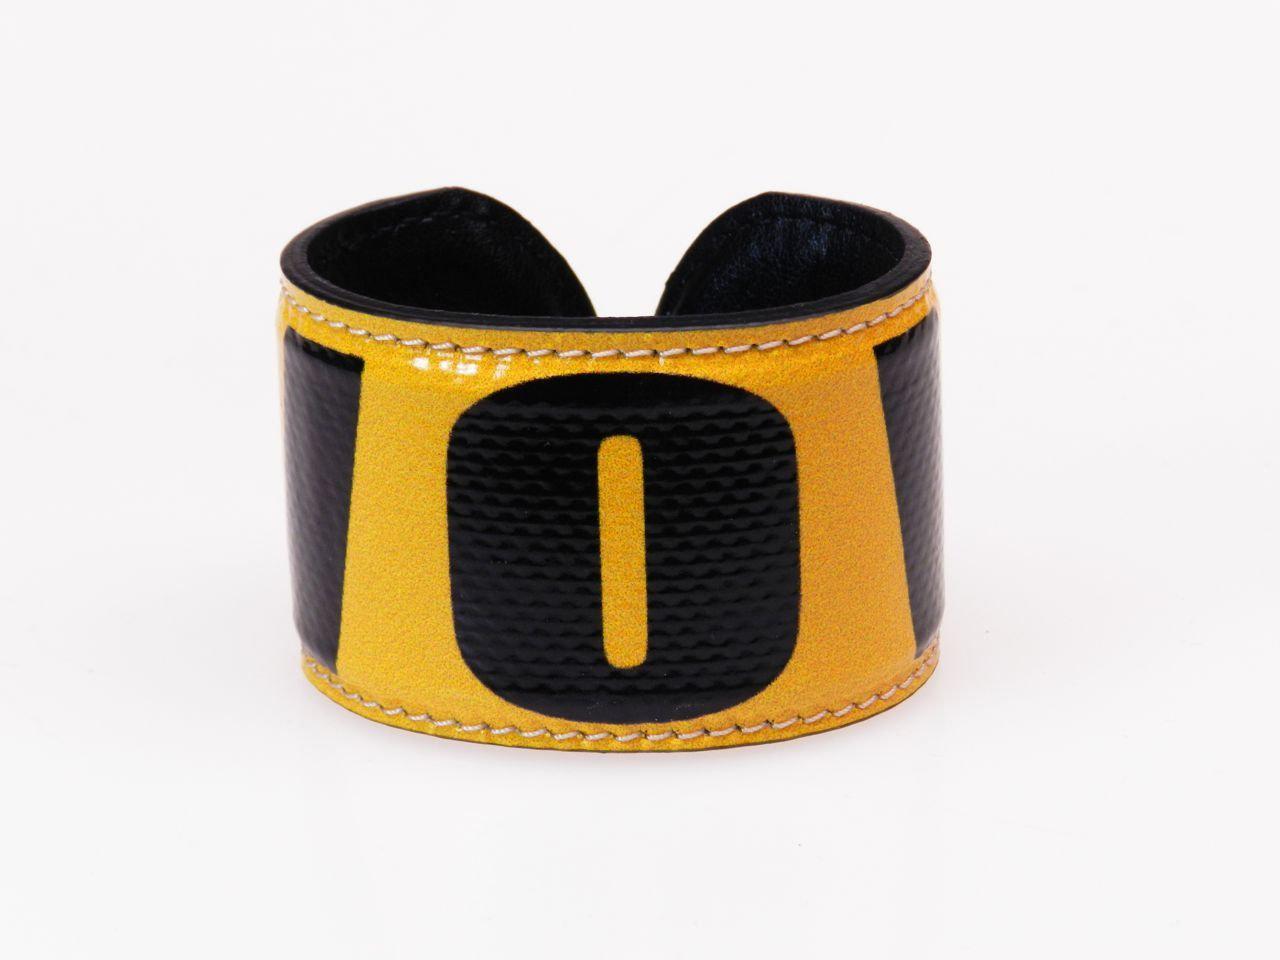 WOMAN BRACELET YELLOW AND BLACK COLOURS "WOW" - Limited Edition Paul Meccanico